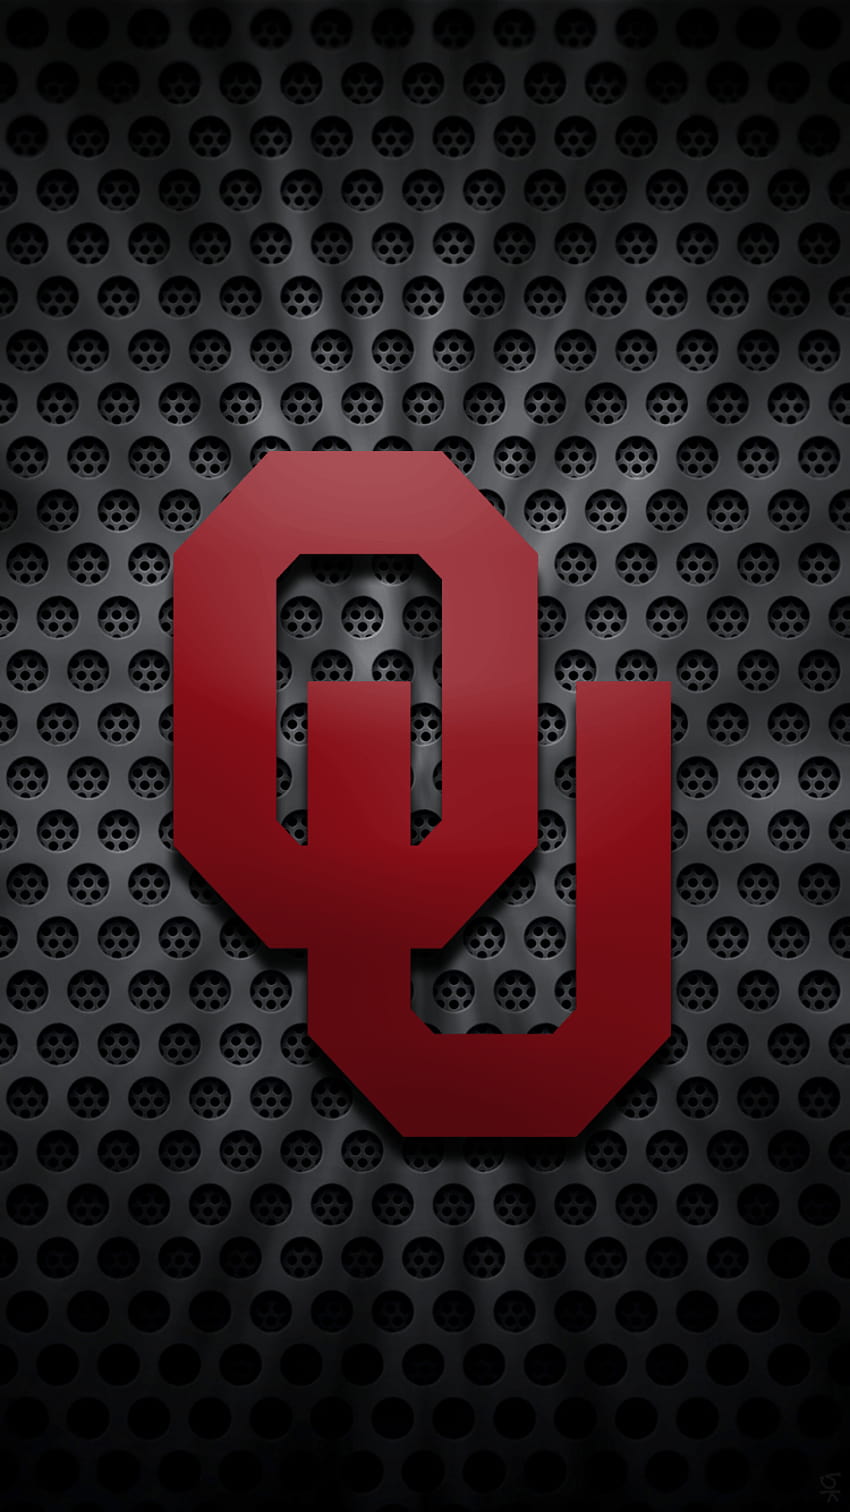 Ou Football Wallpaper 68 pictures